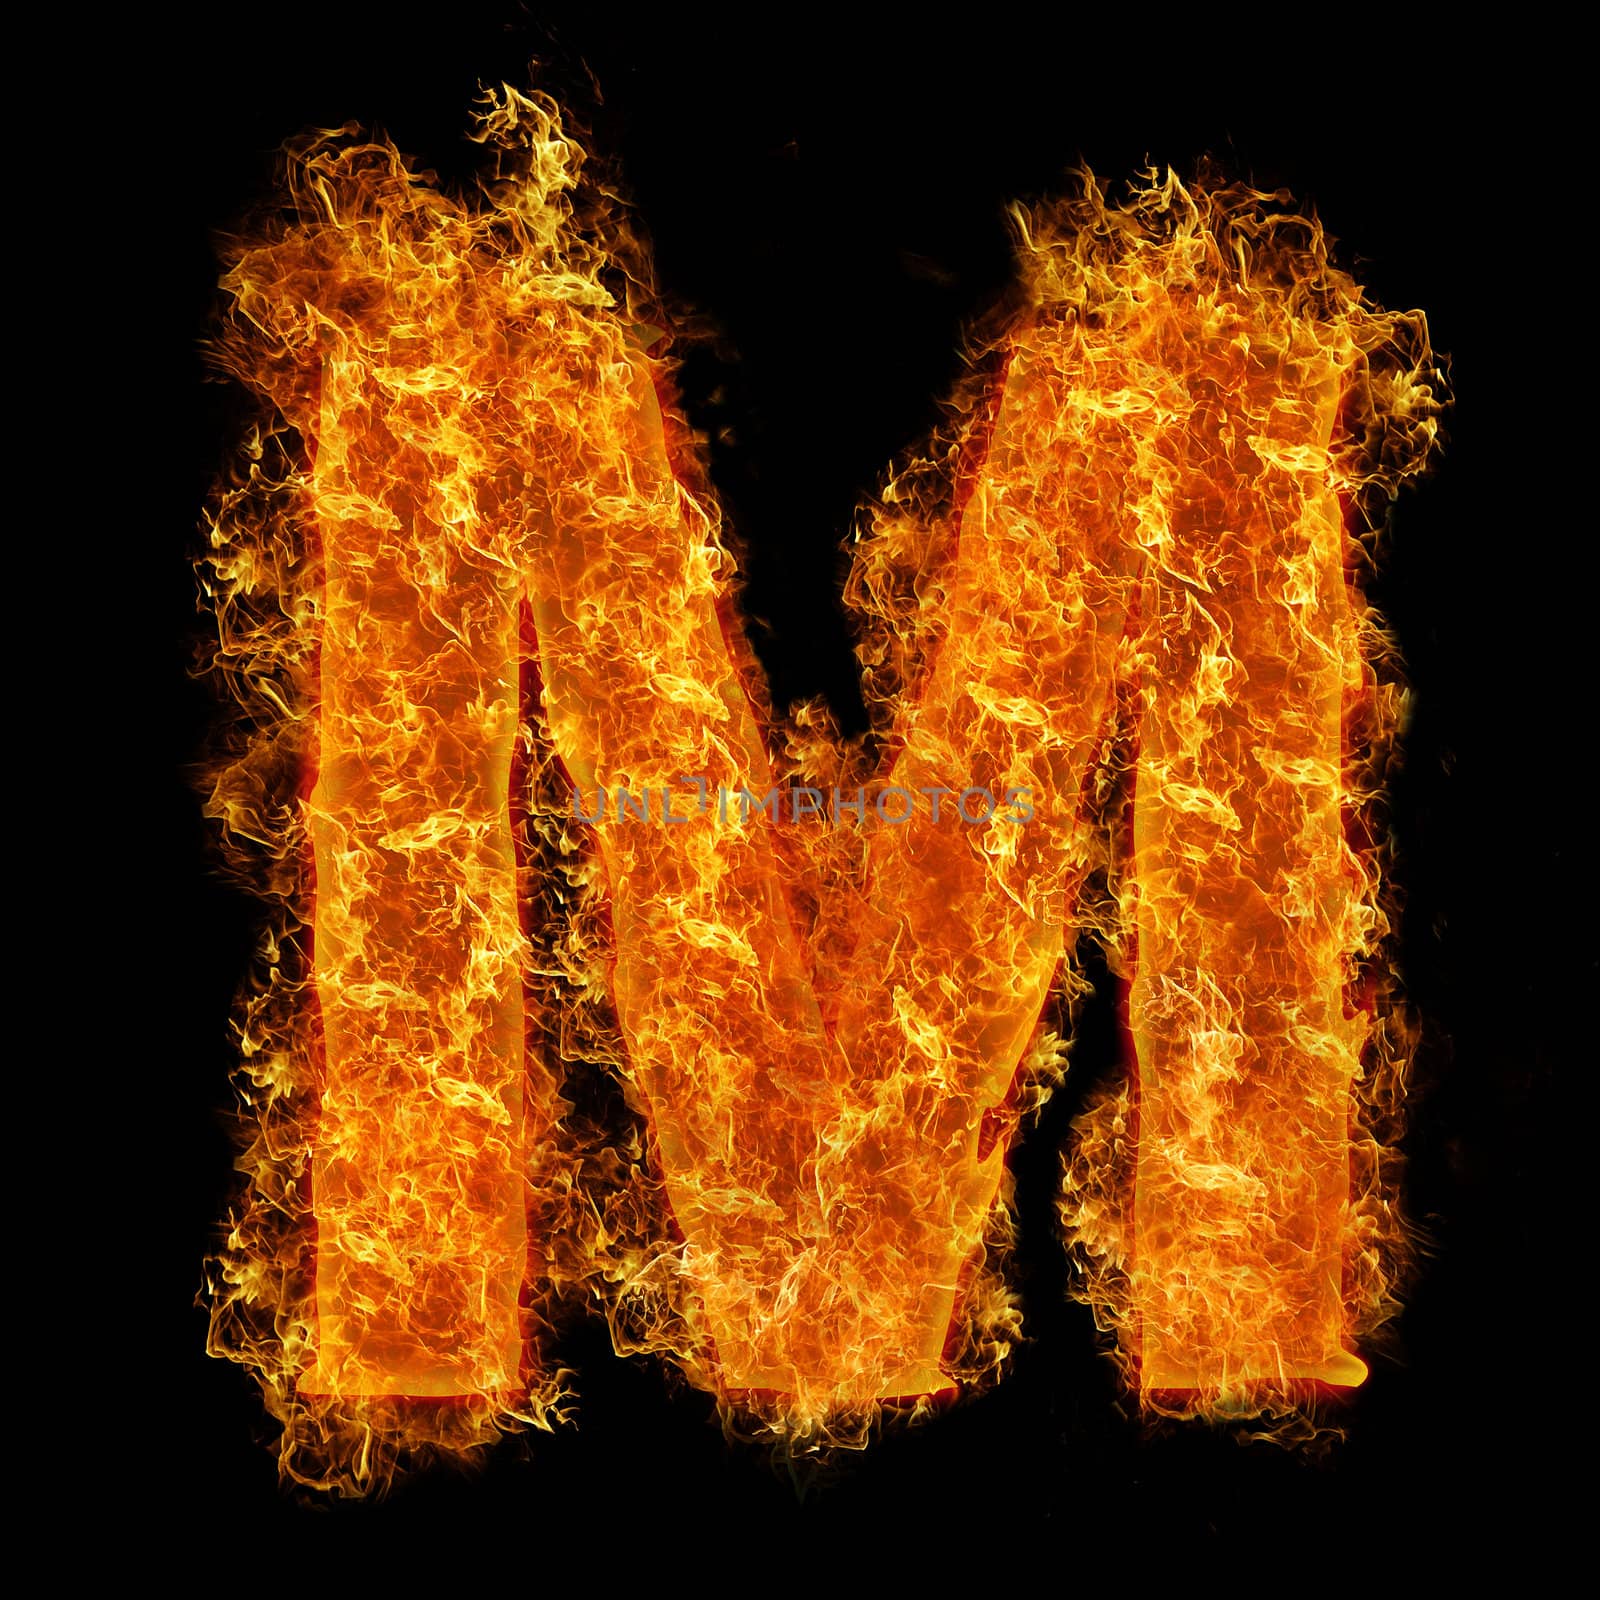 Fire letter M by rusak